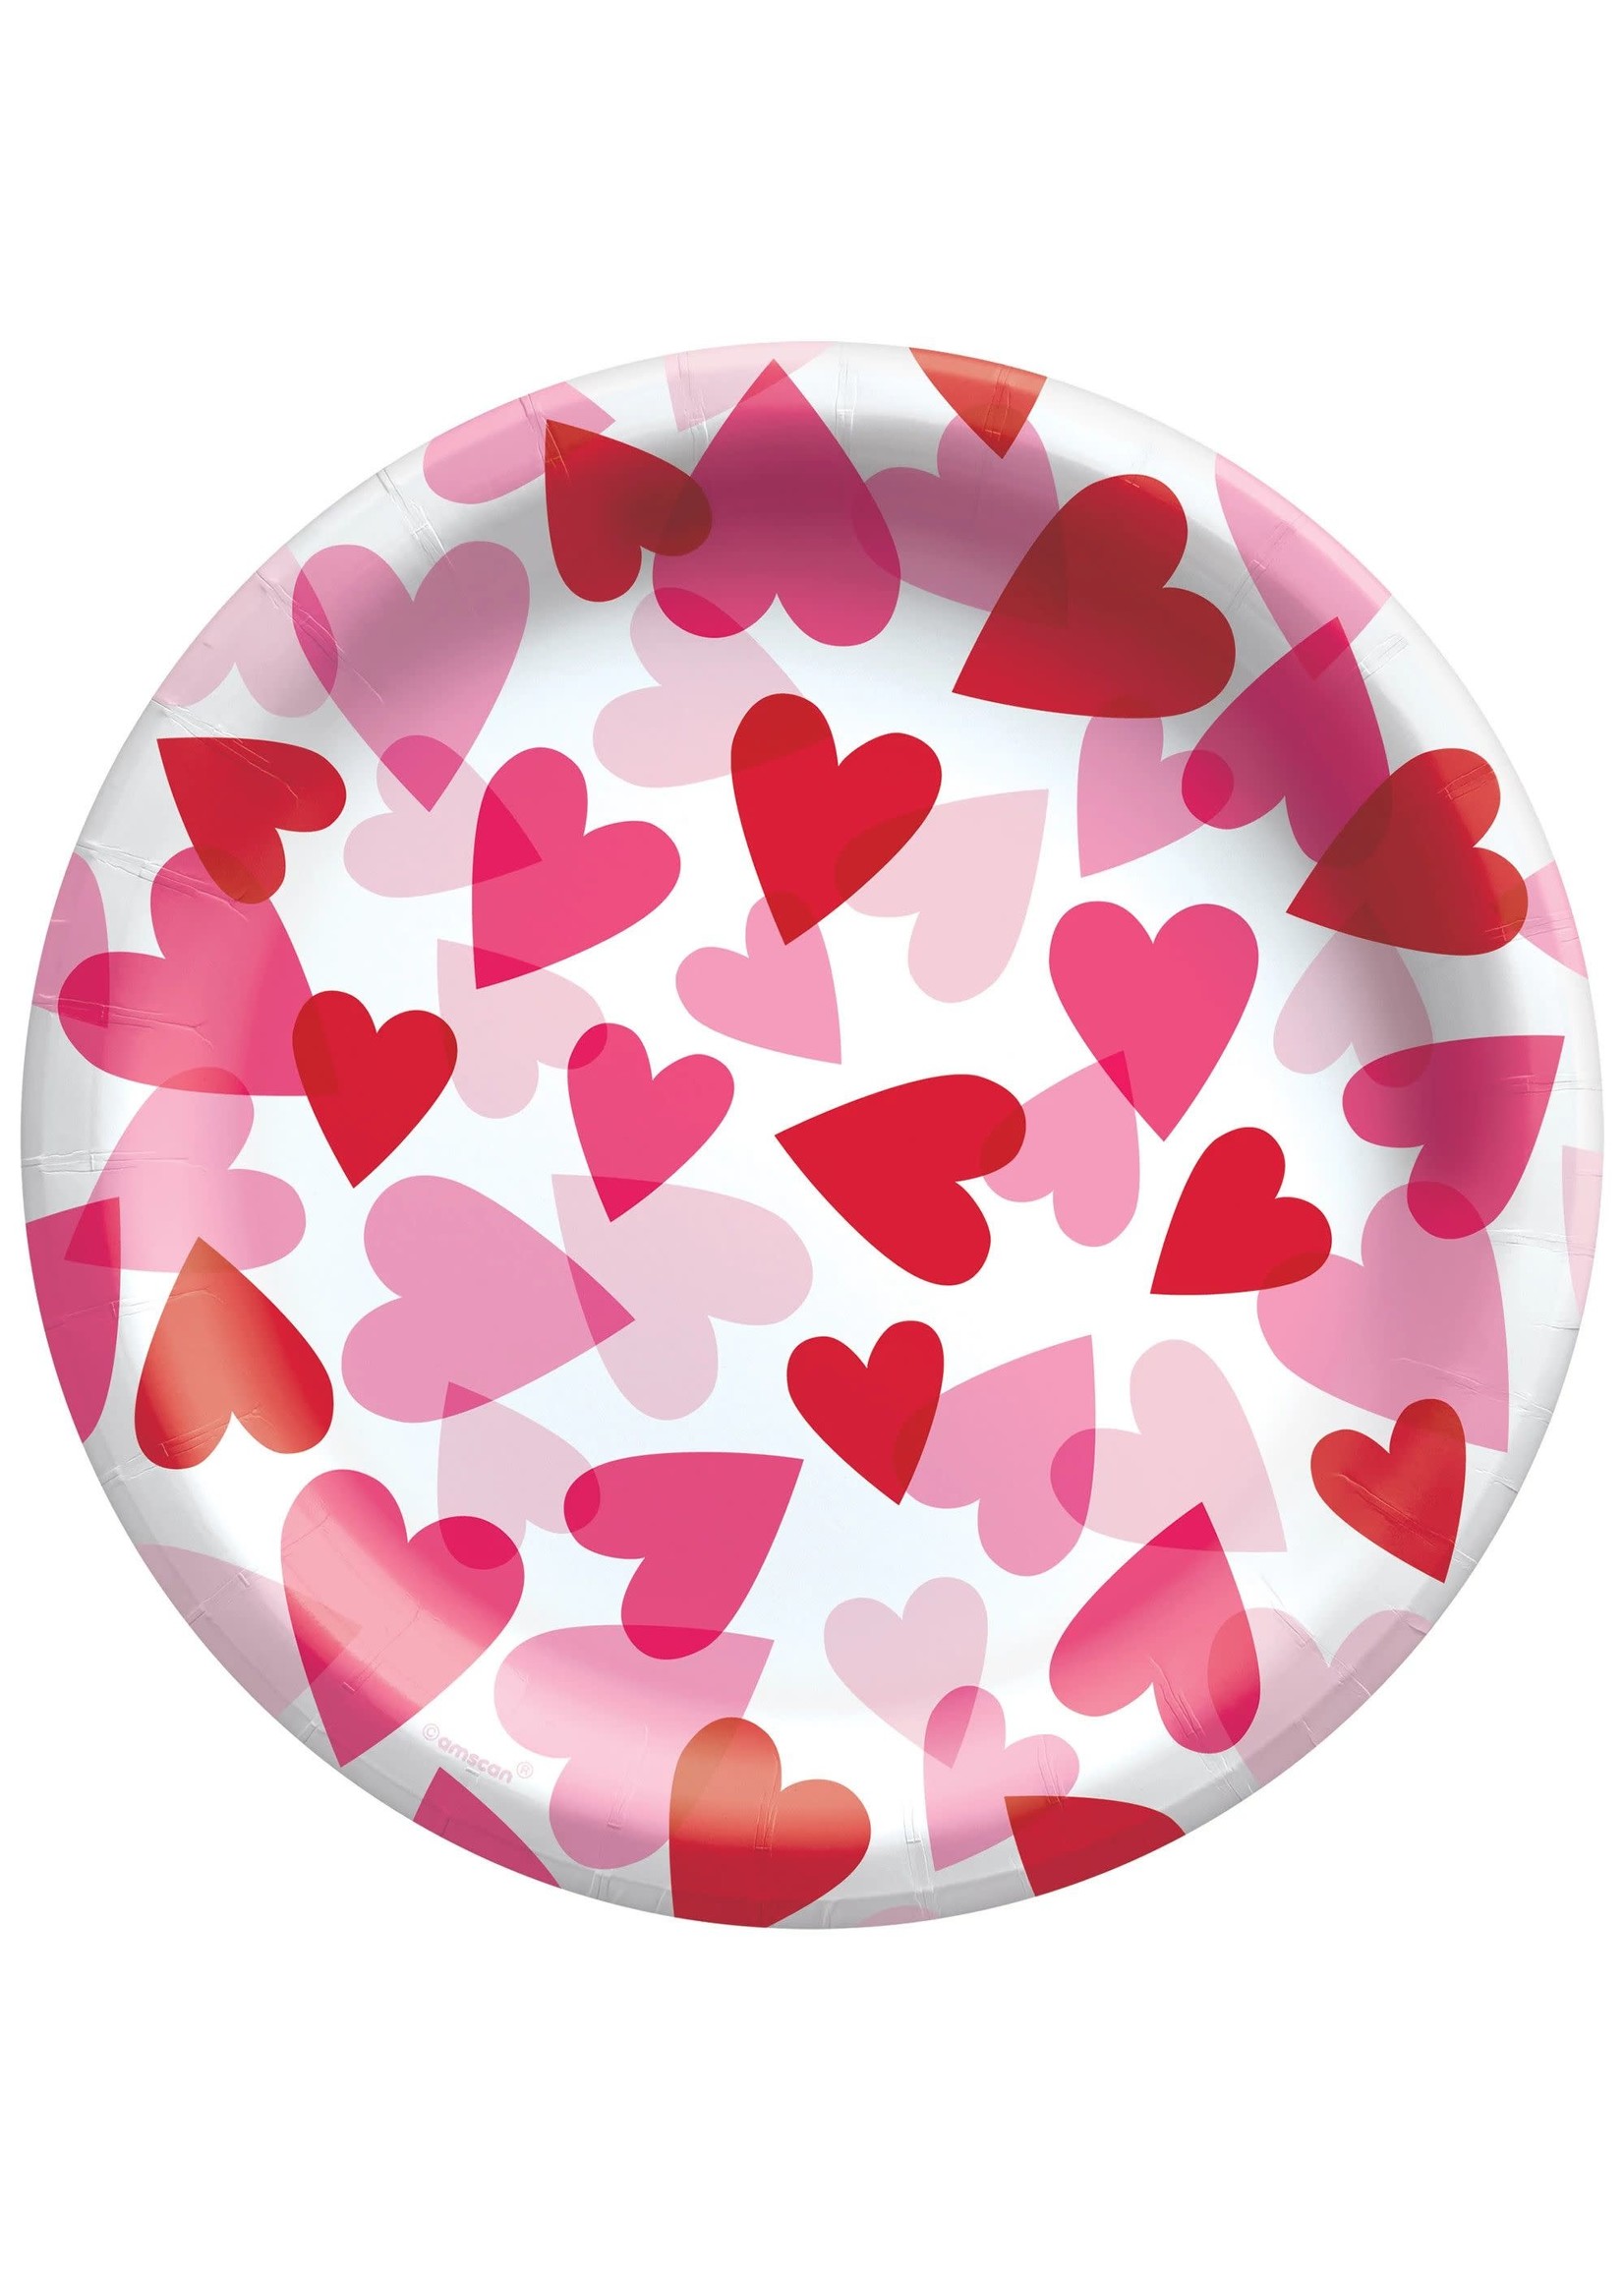 Amscan HEART PARTY 7'' ROUND PLATES